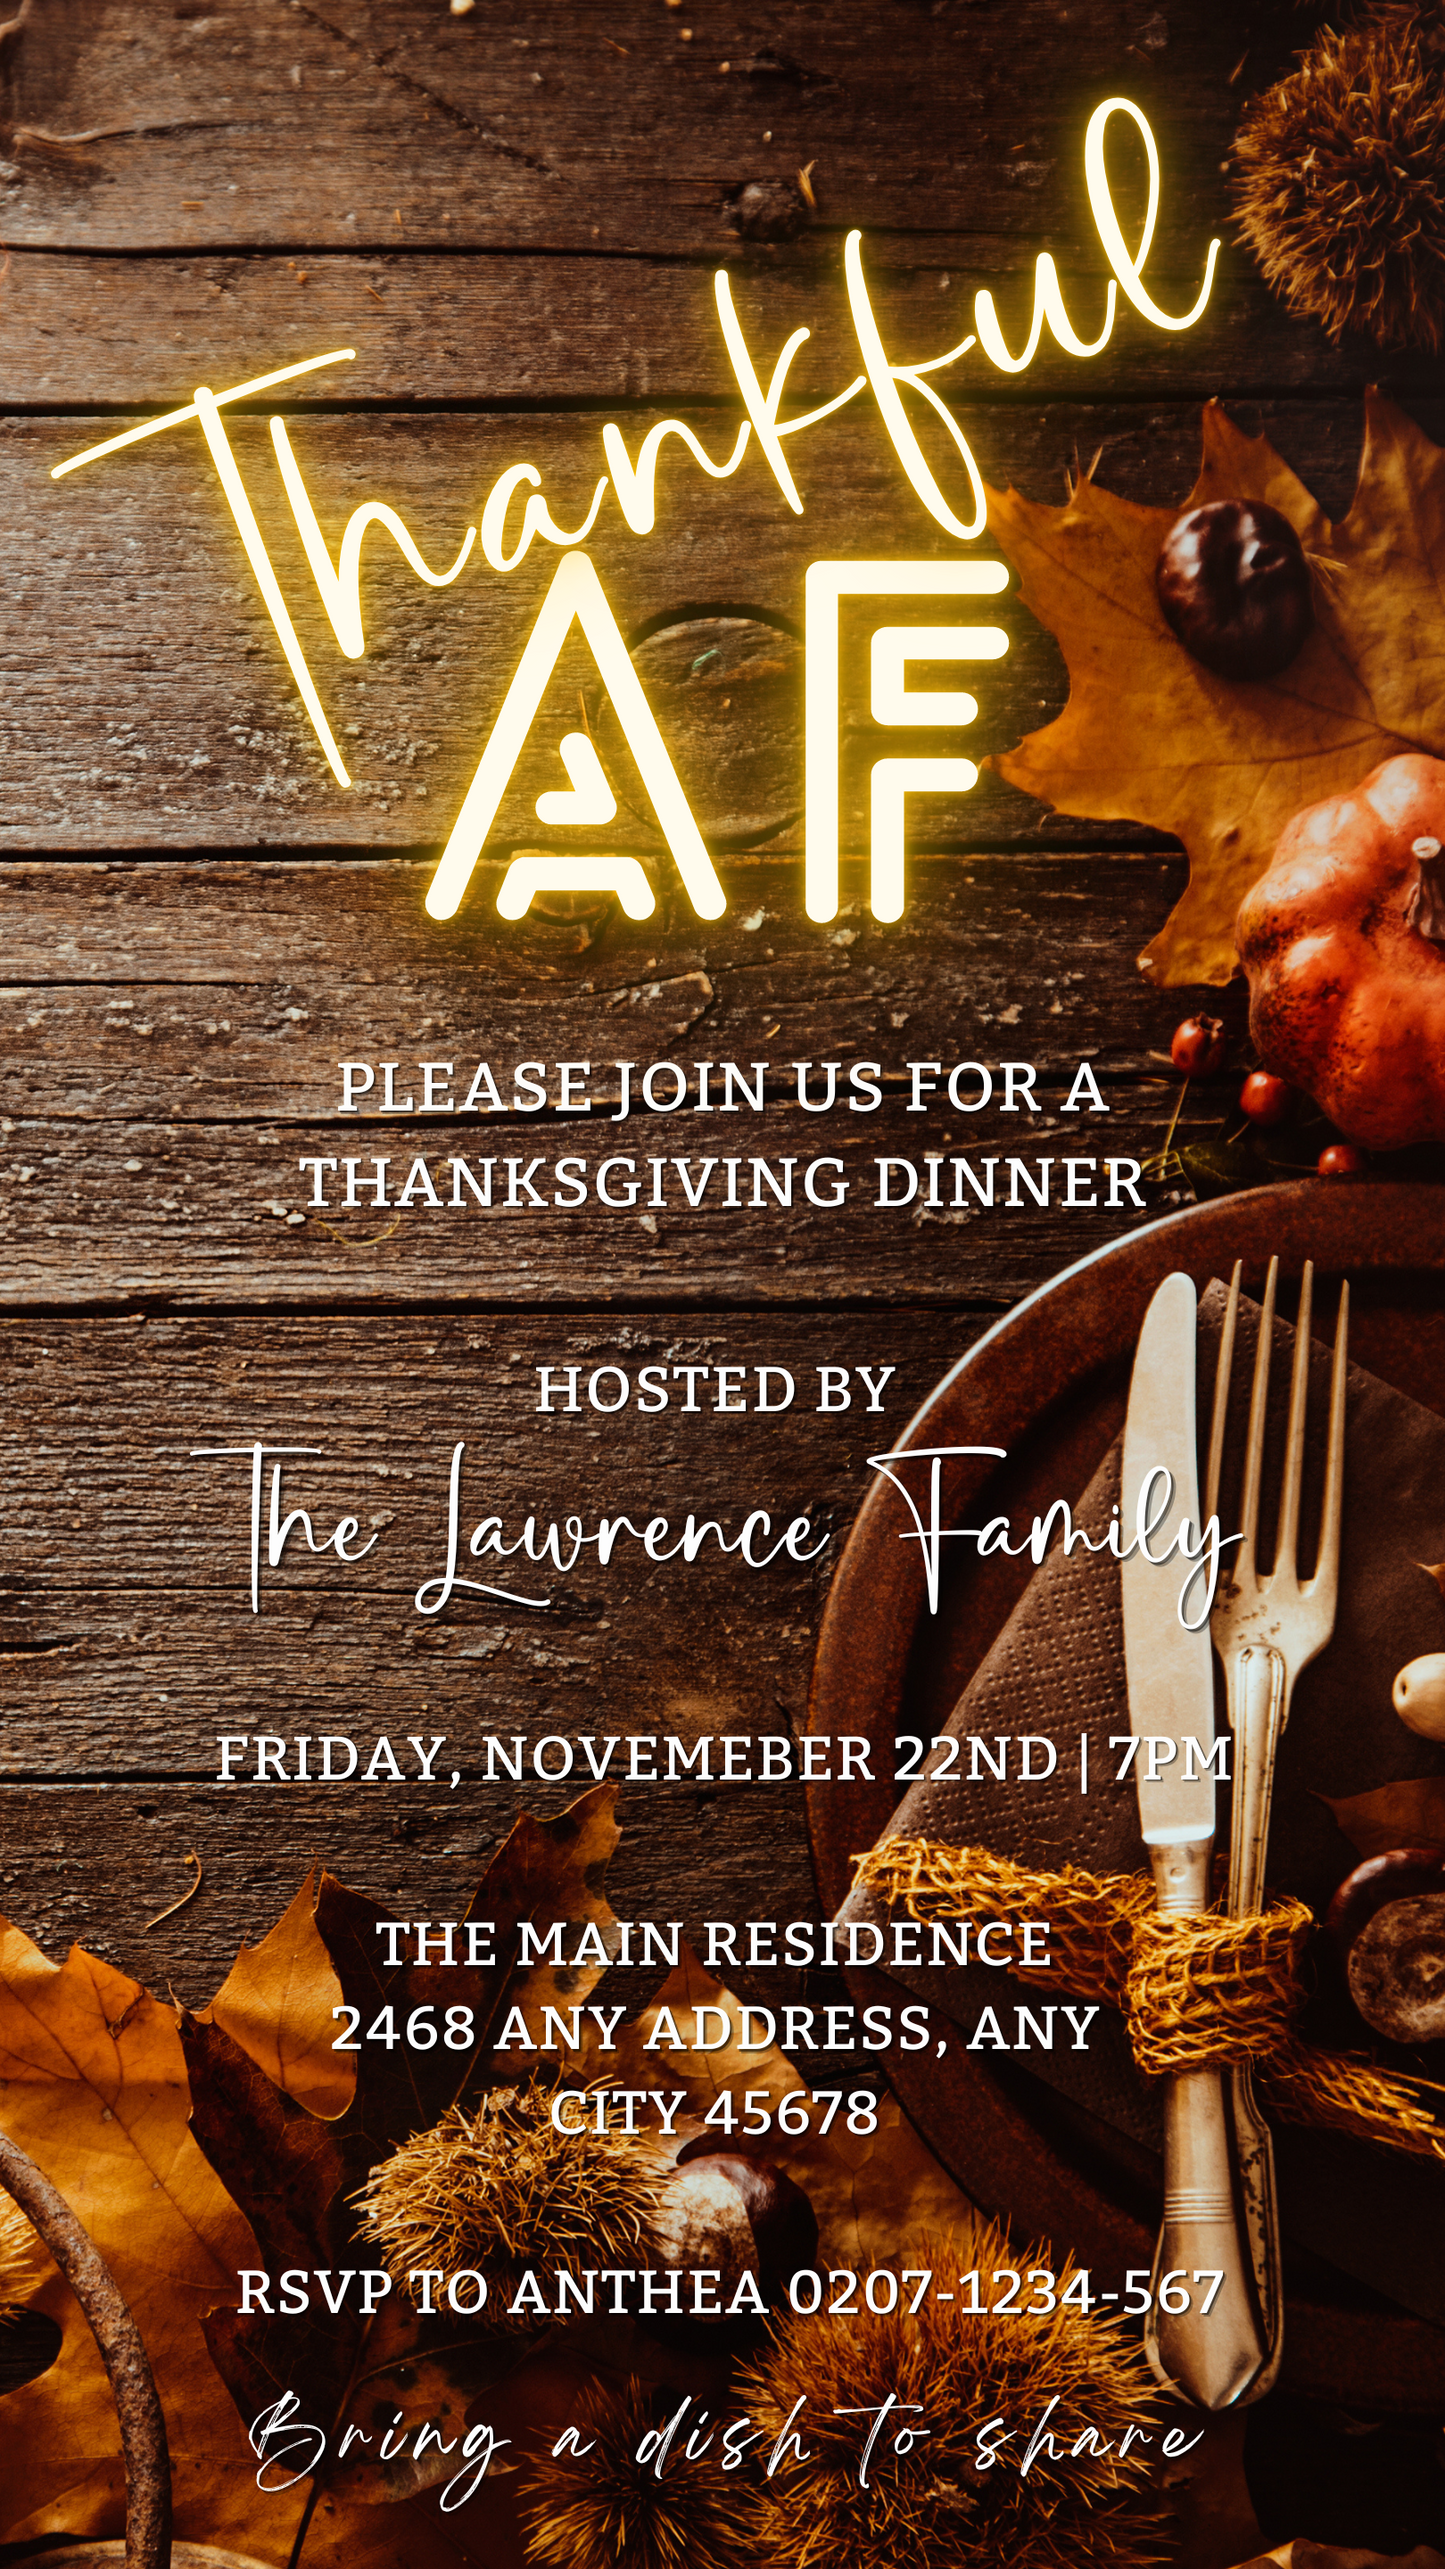 Thankful AF Neon Wooden Table | Thanksgiving Dinner Evite with fork and knife, customizable via Canva, perfect for digital sharing on WhatsApp and email.